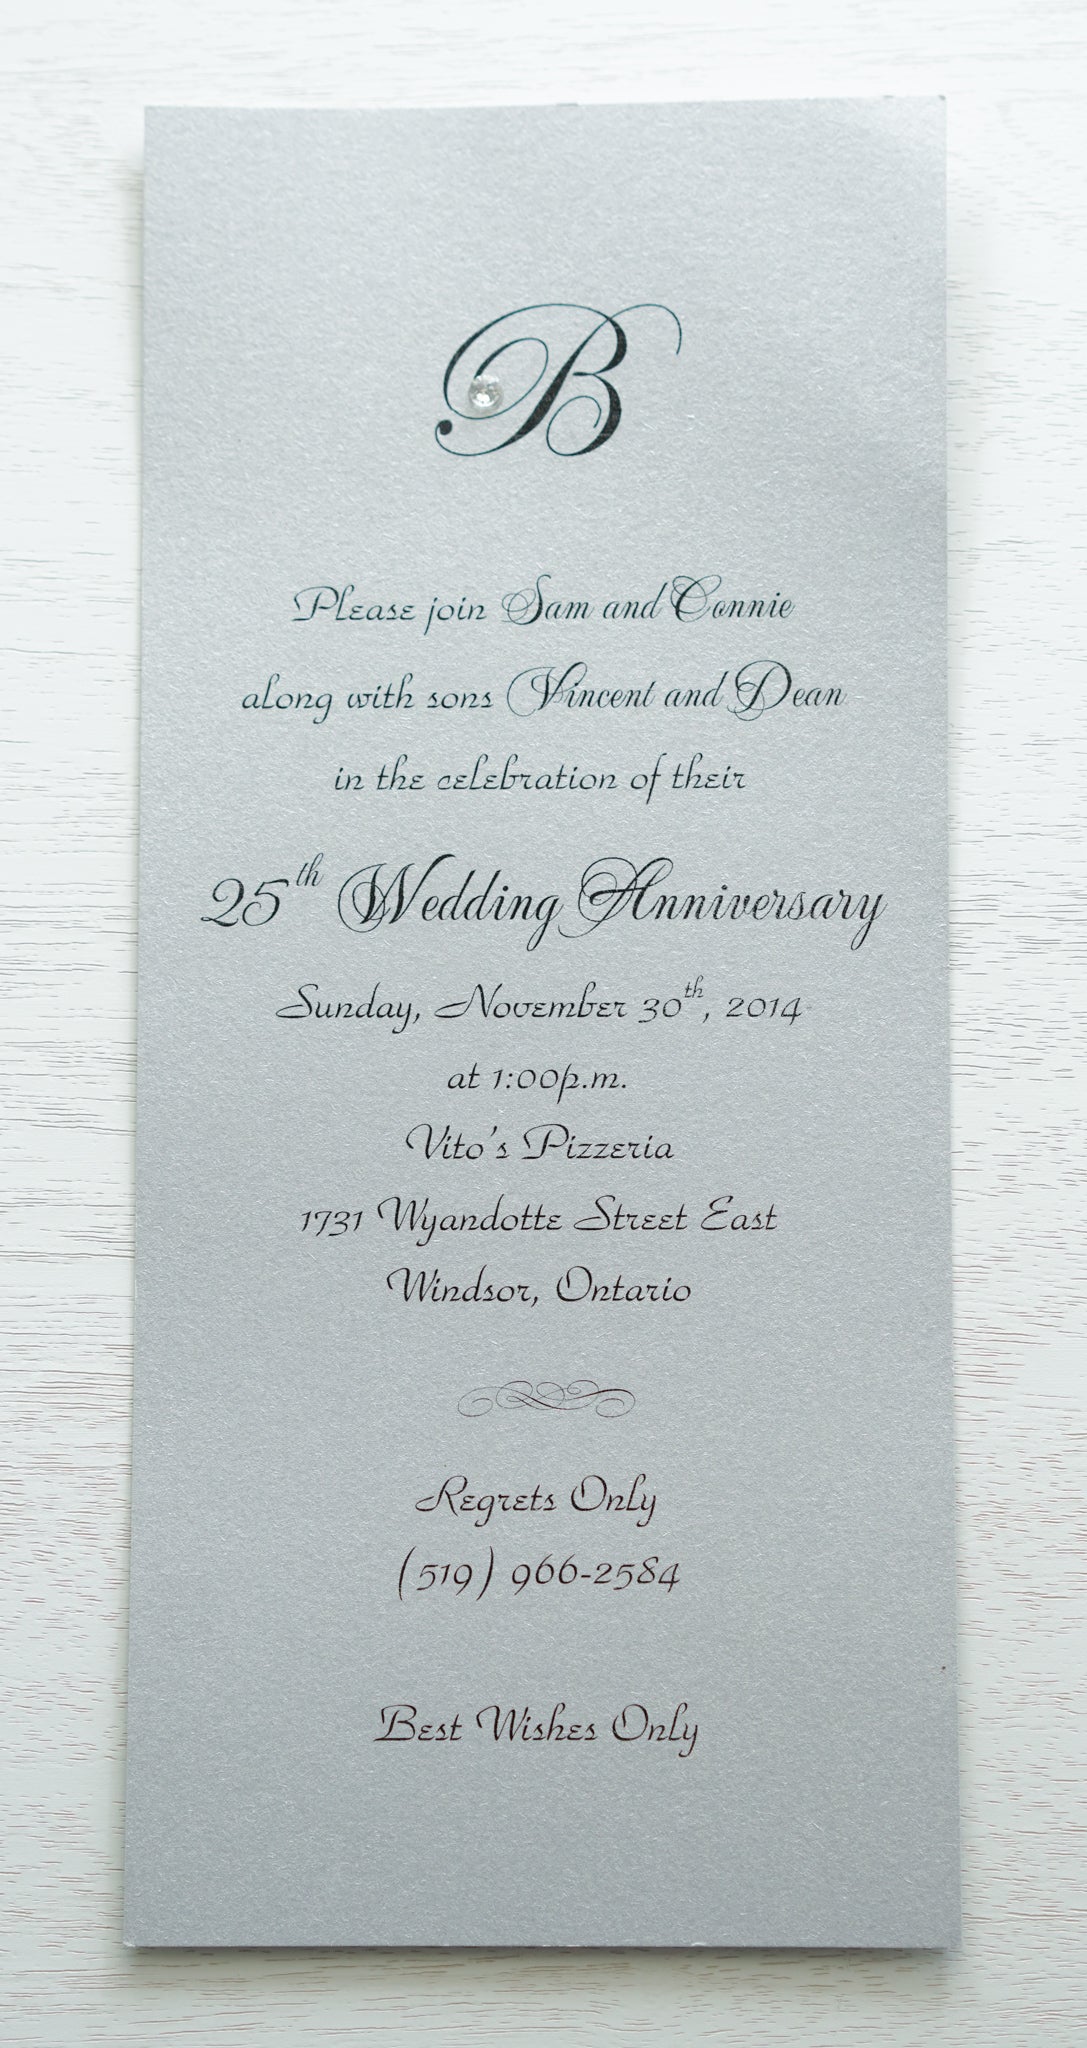 alt=“Simplistic 25th Wedding Anniversary invitation features a silver pearlescent shimmer card stock and an elegant monogram and jewel detail”